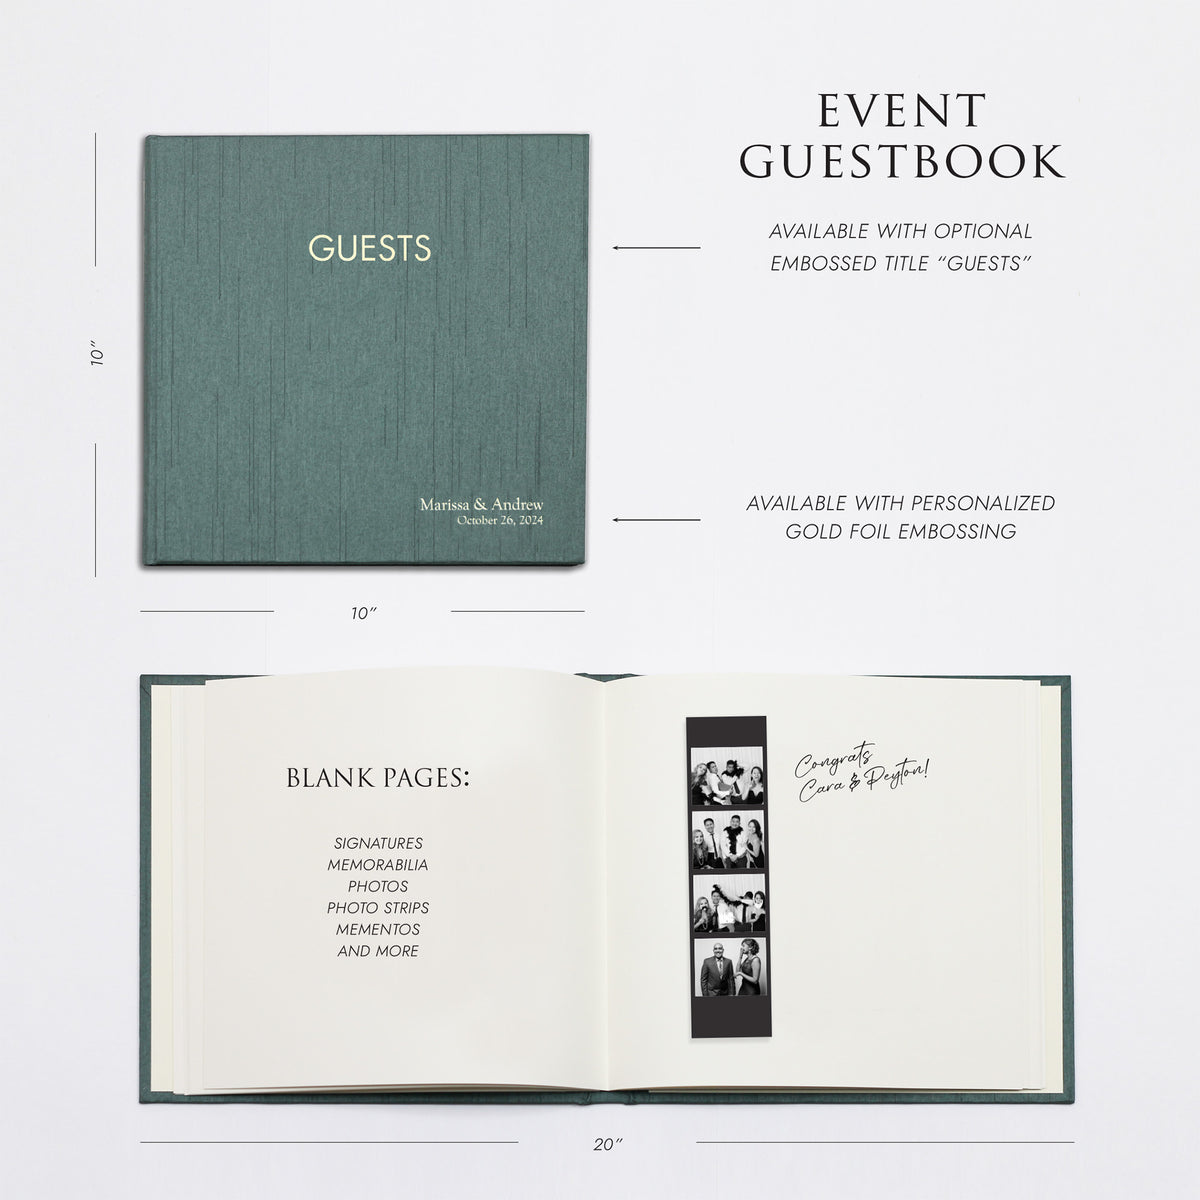 Event Guestbook Embossed with “Guests” | Cover: Emerald Silk | Available Personalized